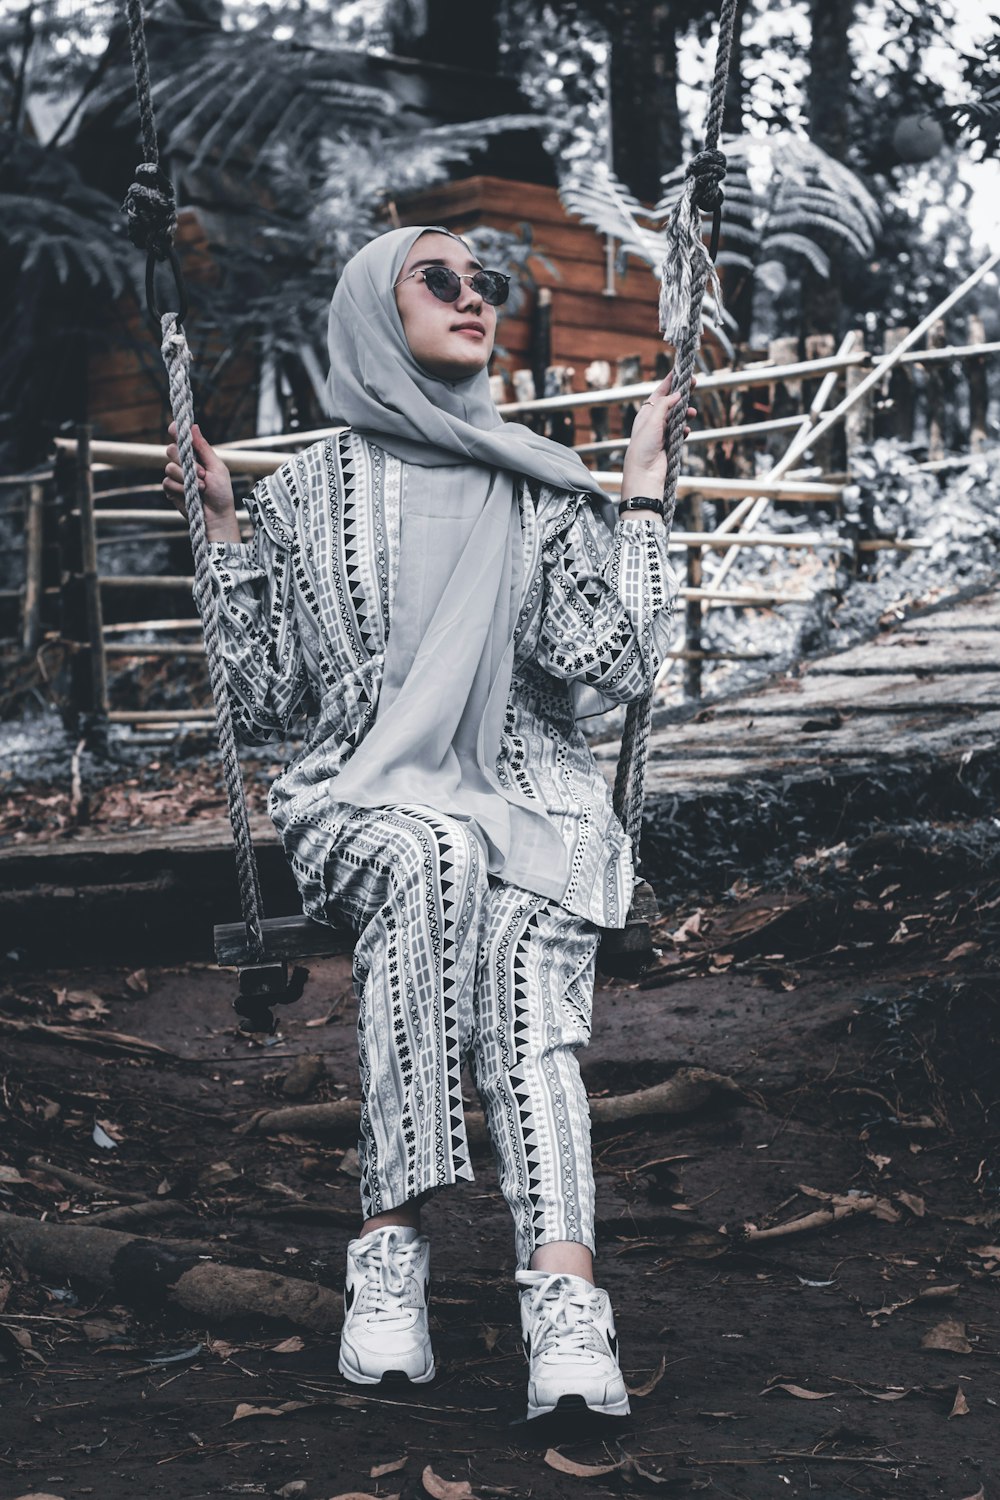 woman in white and black hijab sitting on swing